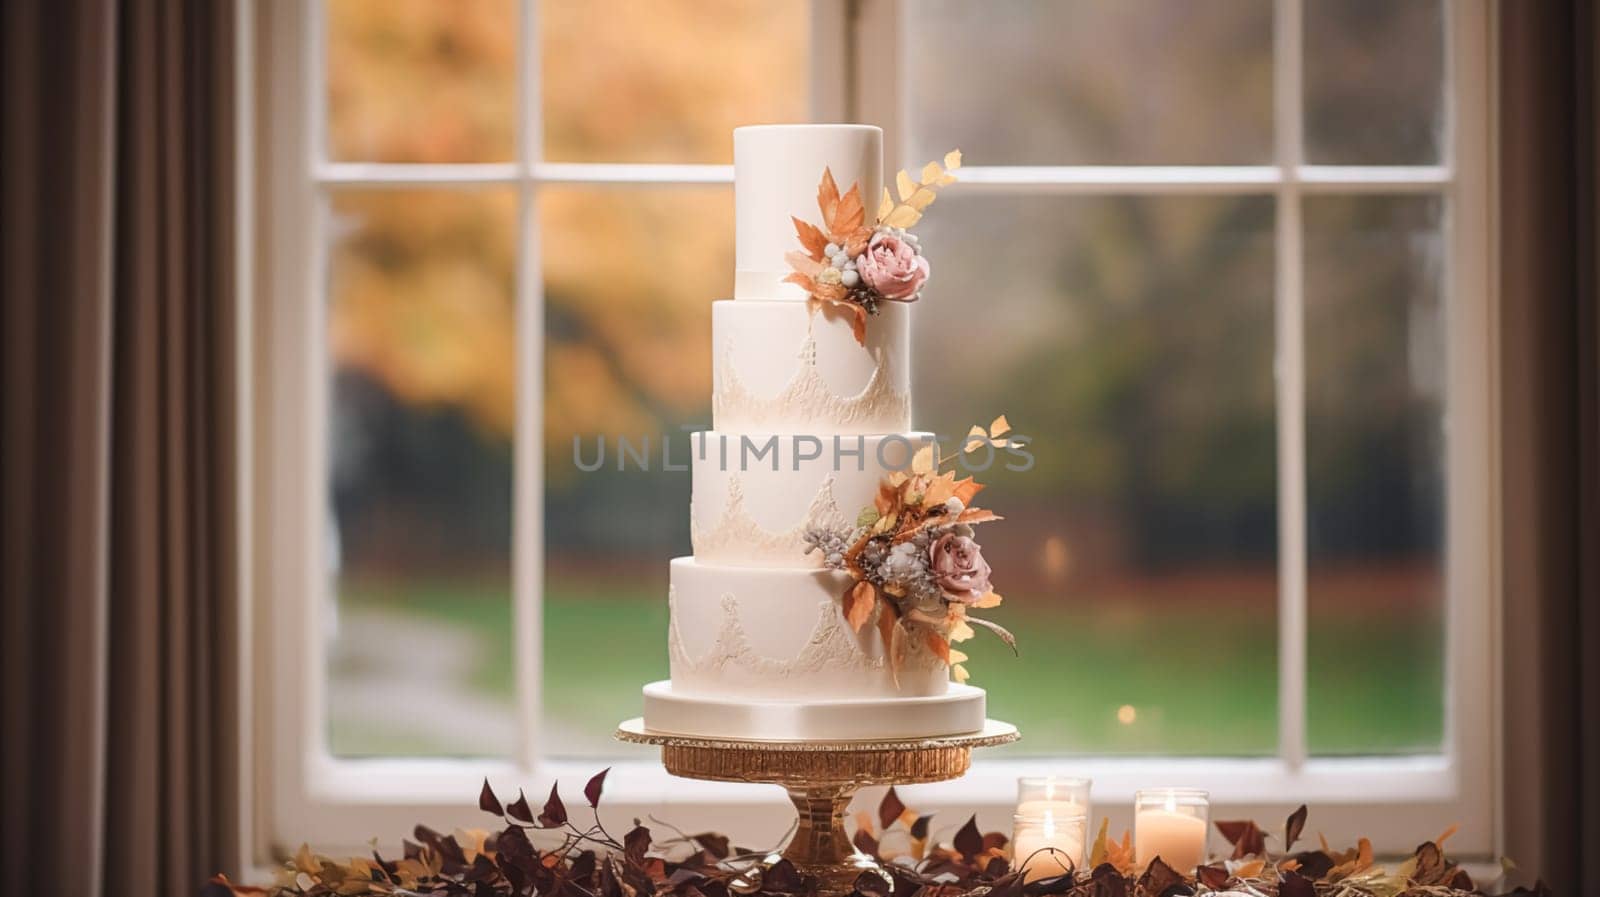 Wedding cake design, autumnal dessert styling and holiday decoration, multi-tier cake for an autumn event venue, food catering service and elegant country decor, cottage style by Anneleven